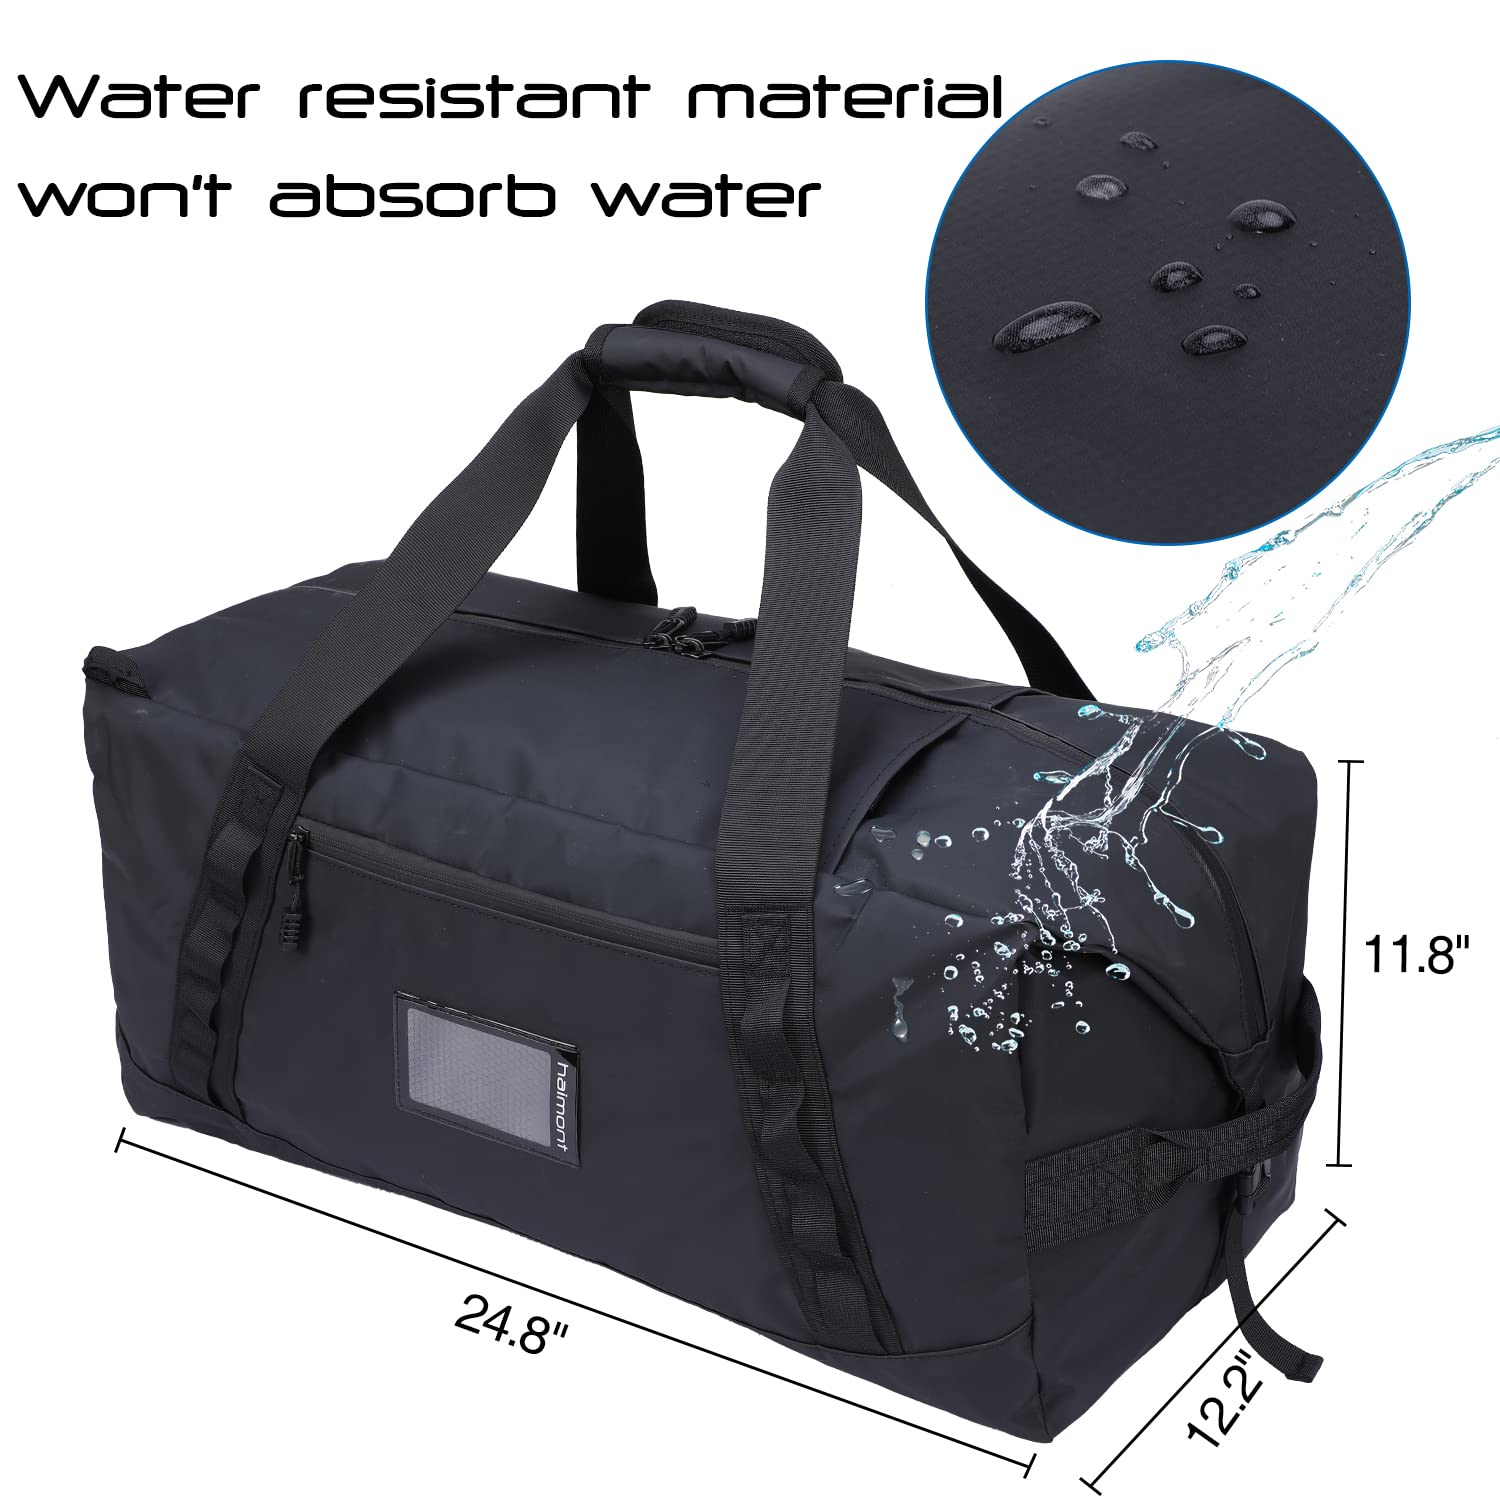 Haimont Large Waterproof Duffel Backpack Roll-Top Heavy Duty Dry Duffle Bag  for Boating, Travel, Mot…See more Haimont Large Waterproof Duffel Backpack